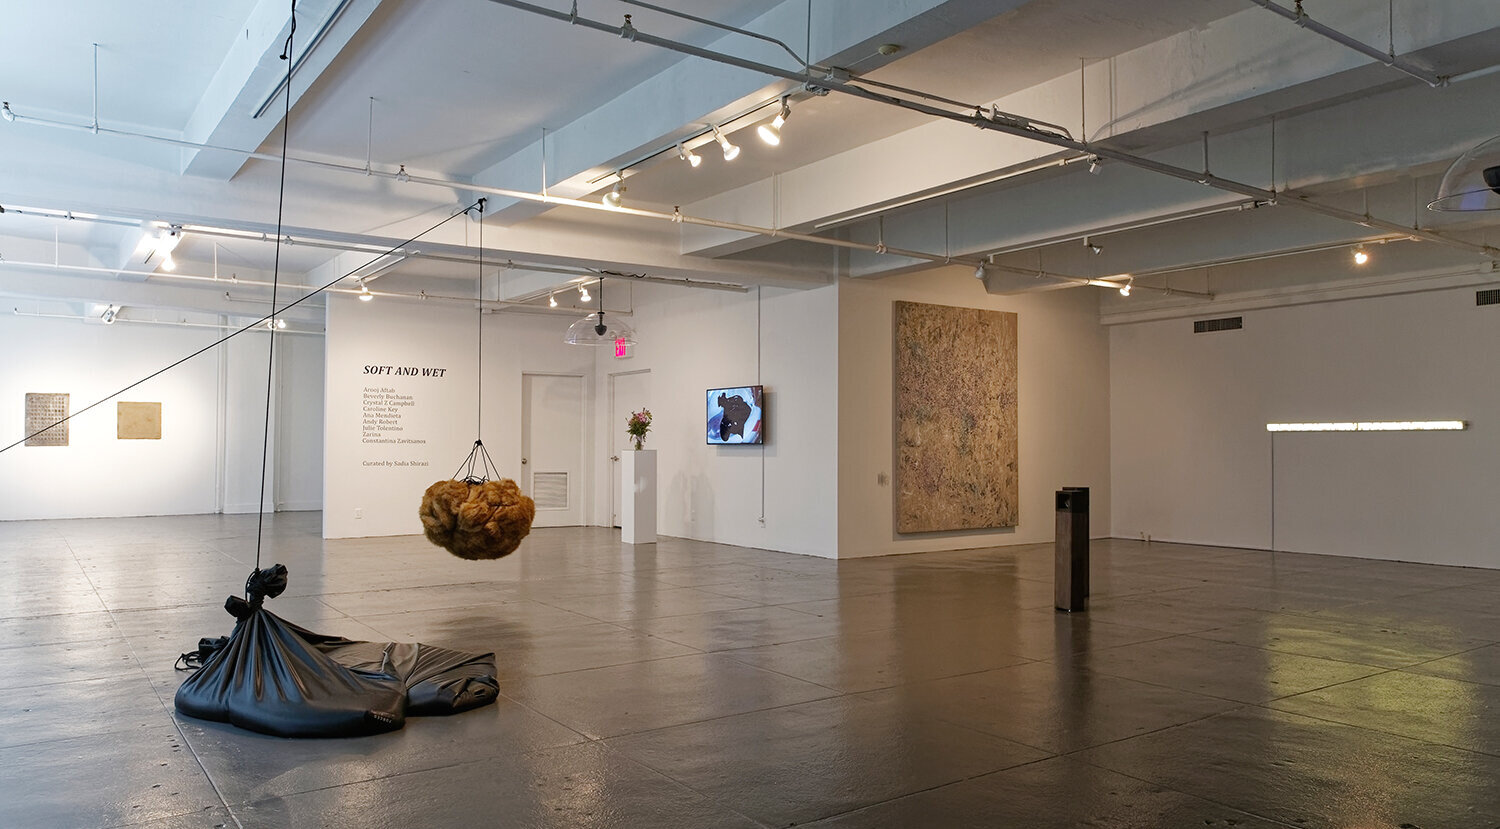  Installation view of  Soft and Wet . Works (left to right): Zarina,  Corners , 1980; Zarina,  I Whispered to the Earth , 1979; Julie Tolentino,  ...soft as a lion, wet as the night , 2019; Caroline Key,  Khôra , 2019; Andy Robert,  After Prince , 20